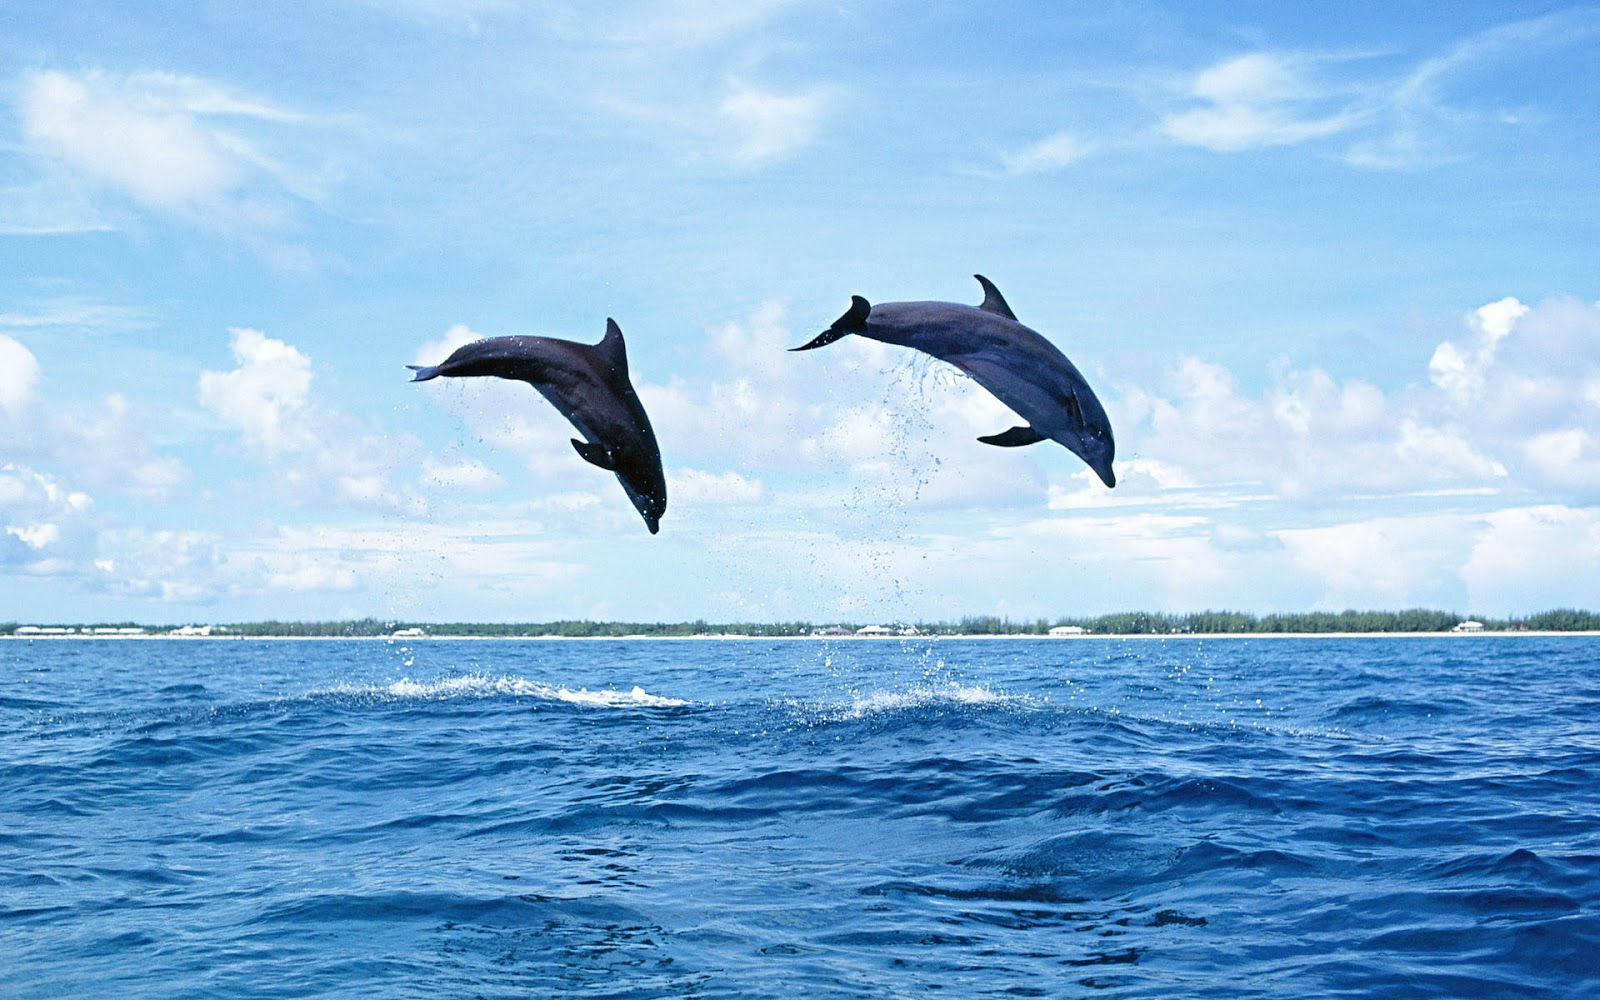 HD Dolphin Wallpaper With A Jumping Through Ring